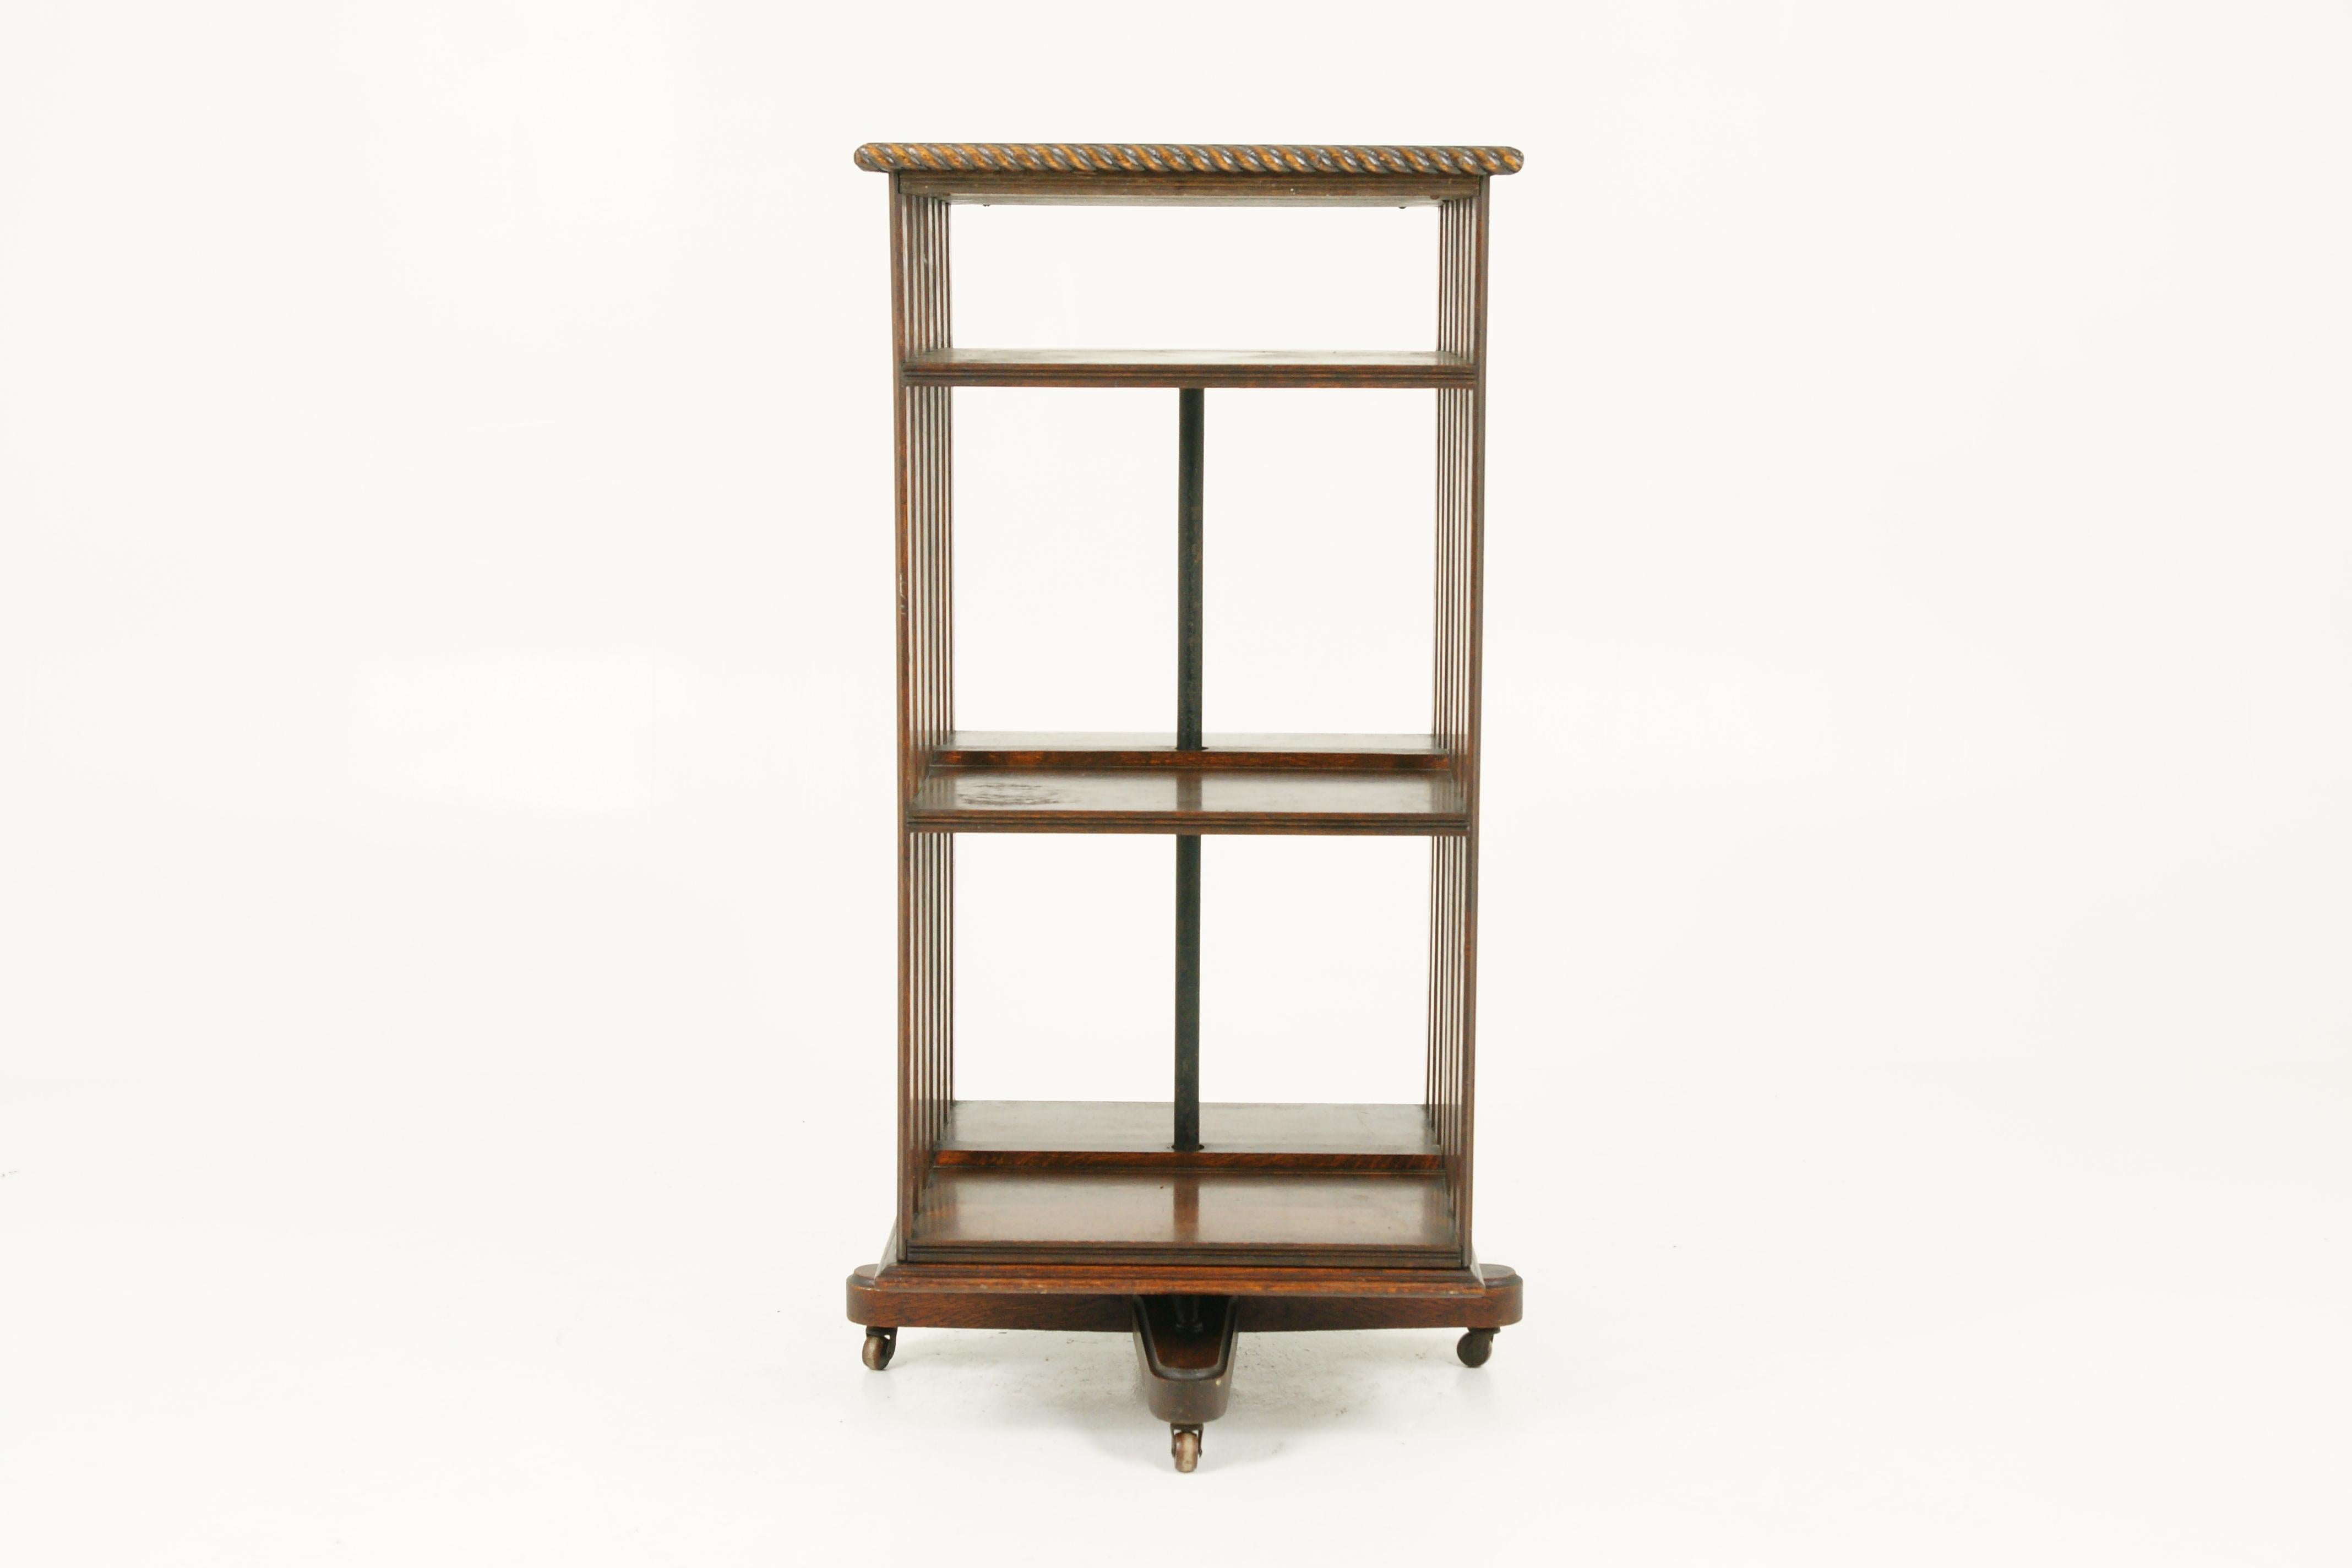 Revolving bookcase, antique bookcase, Edwardian, solid oak, Scotland 1910, B1644

Scotland 1910
Solid oak construction with original finish
Rectangular top with pie crust edge
Bookcase has four sections with three tier construction
Vertical slats to